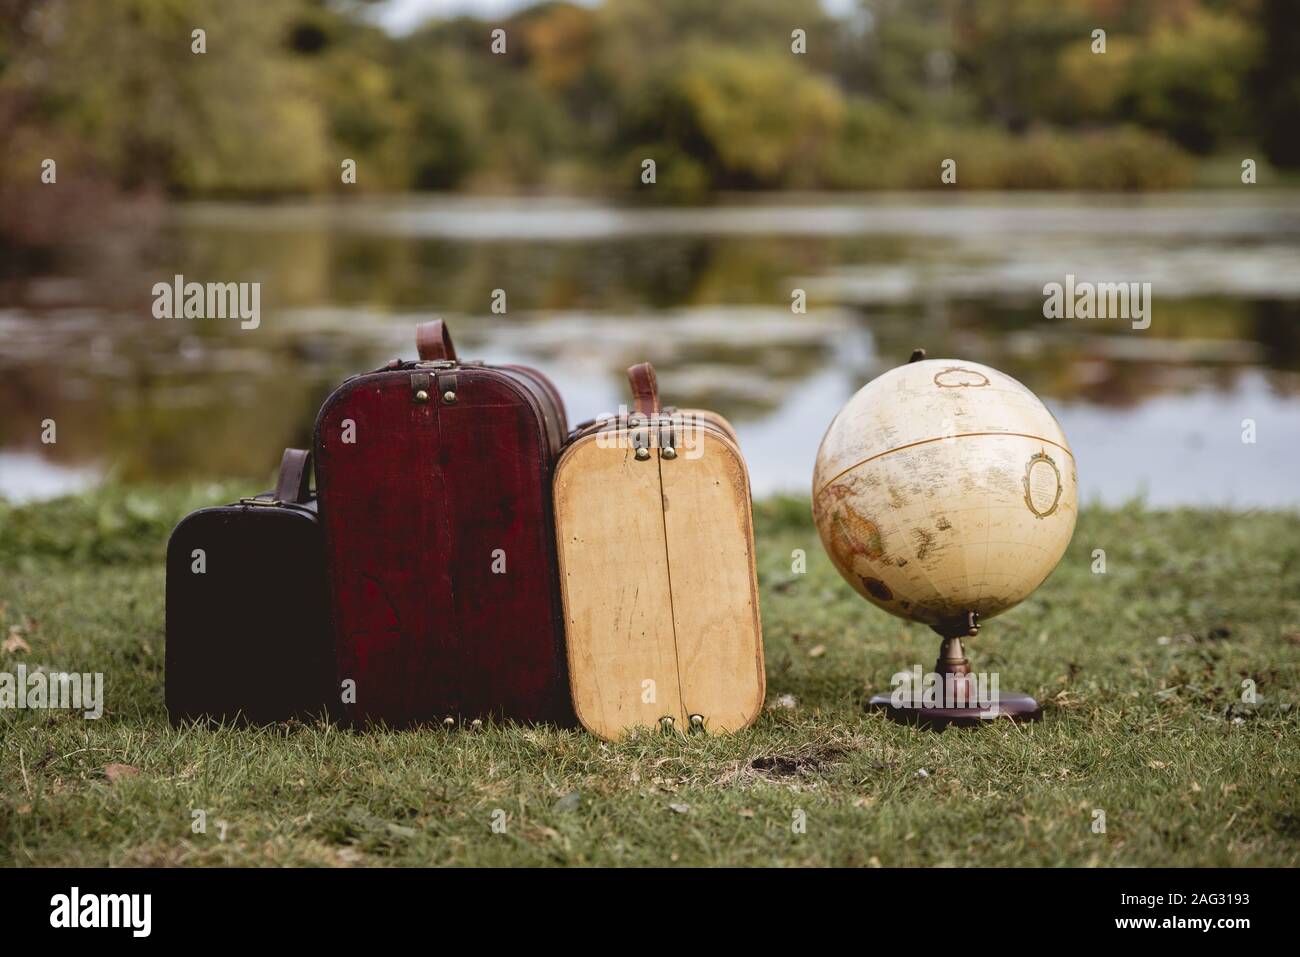 Closeup shot of old suitcases on a grassy field near a desk globe with a blurred background Stock Photo